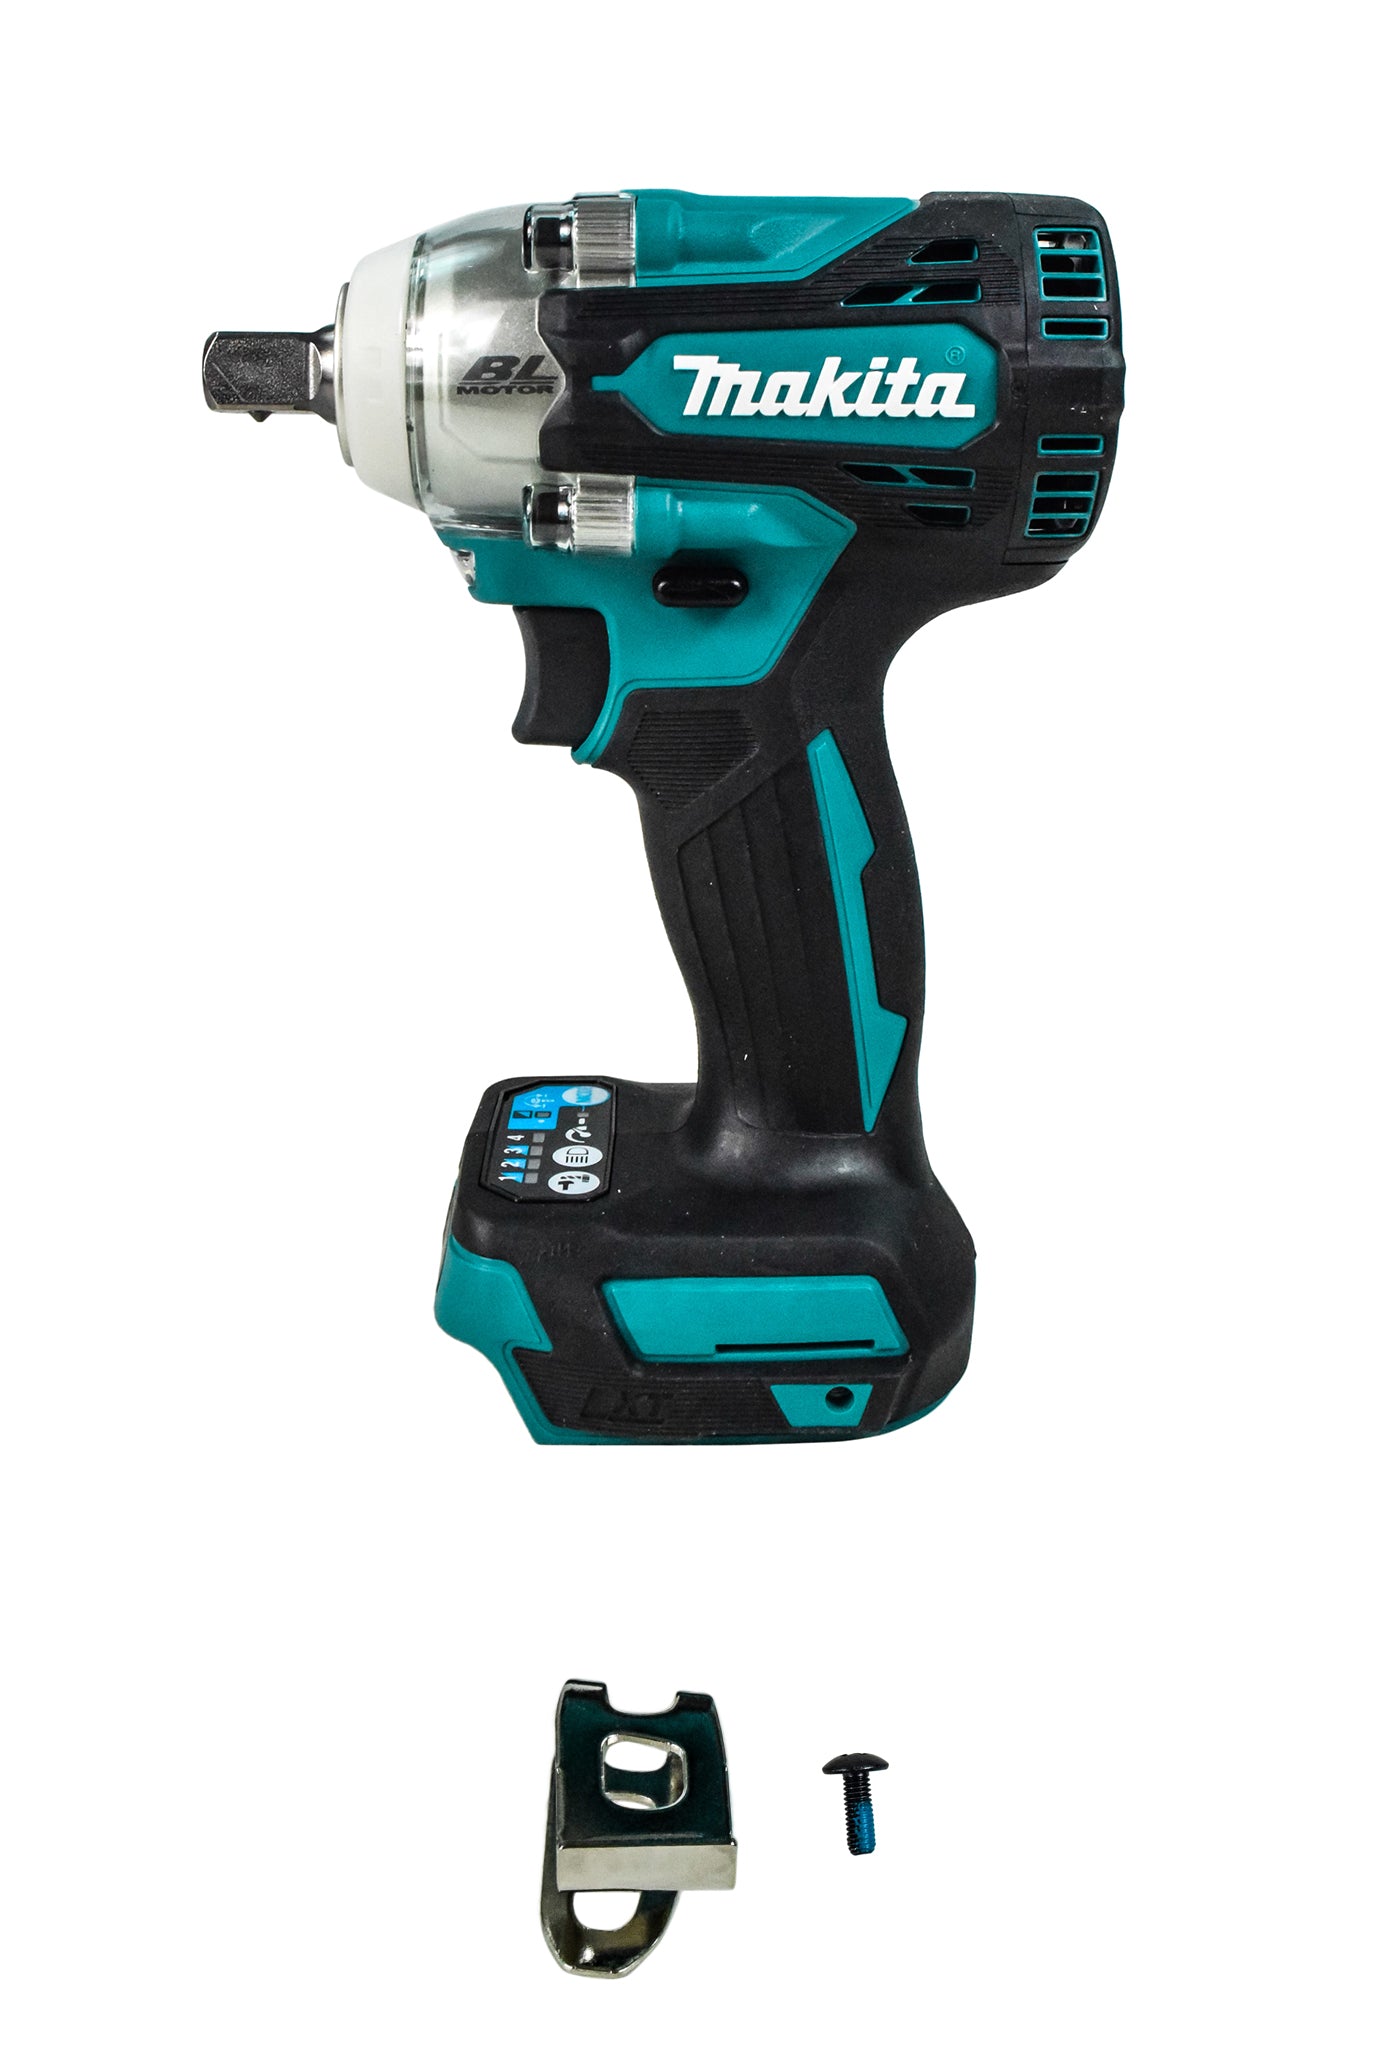 Makita XWT15Z 18V LXT Lithium-Ion Brushless Cordless 4-Speed 1/2" Sq. Drive Impact Wrench w/Detent Anvil, Tool Only